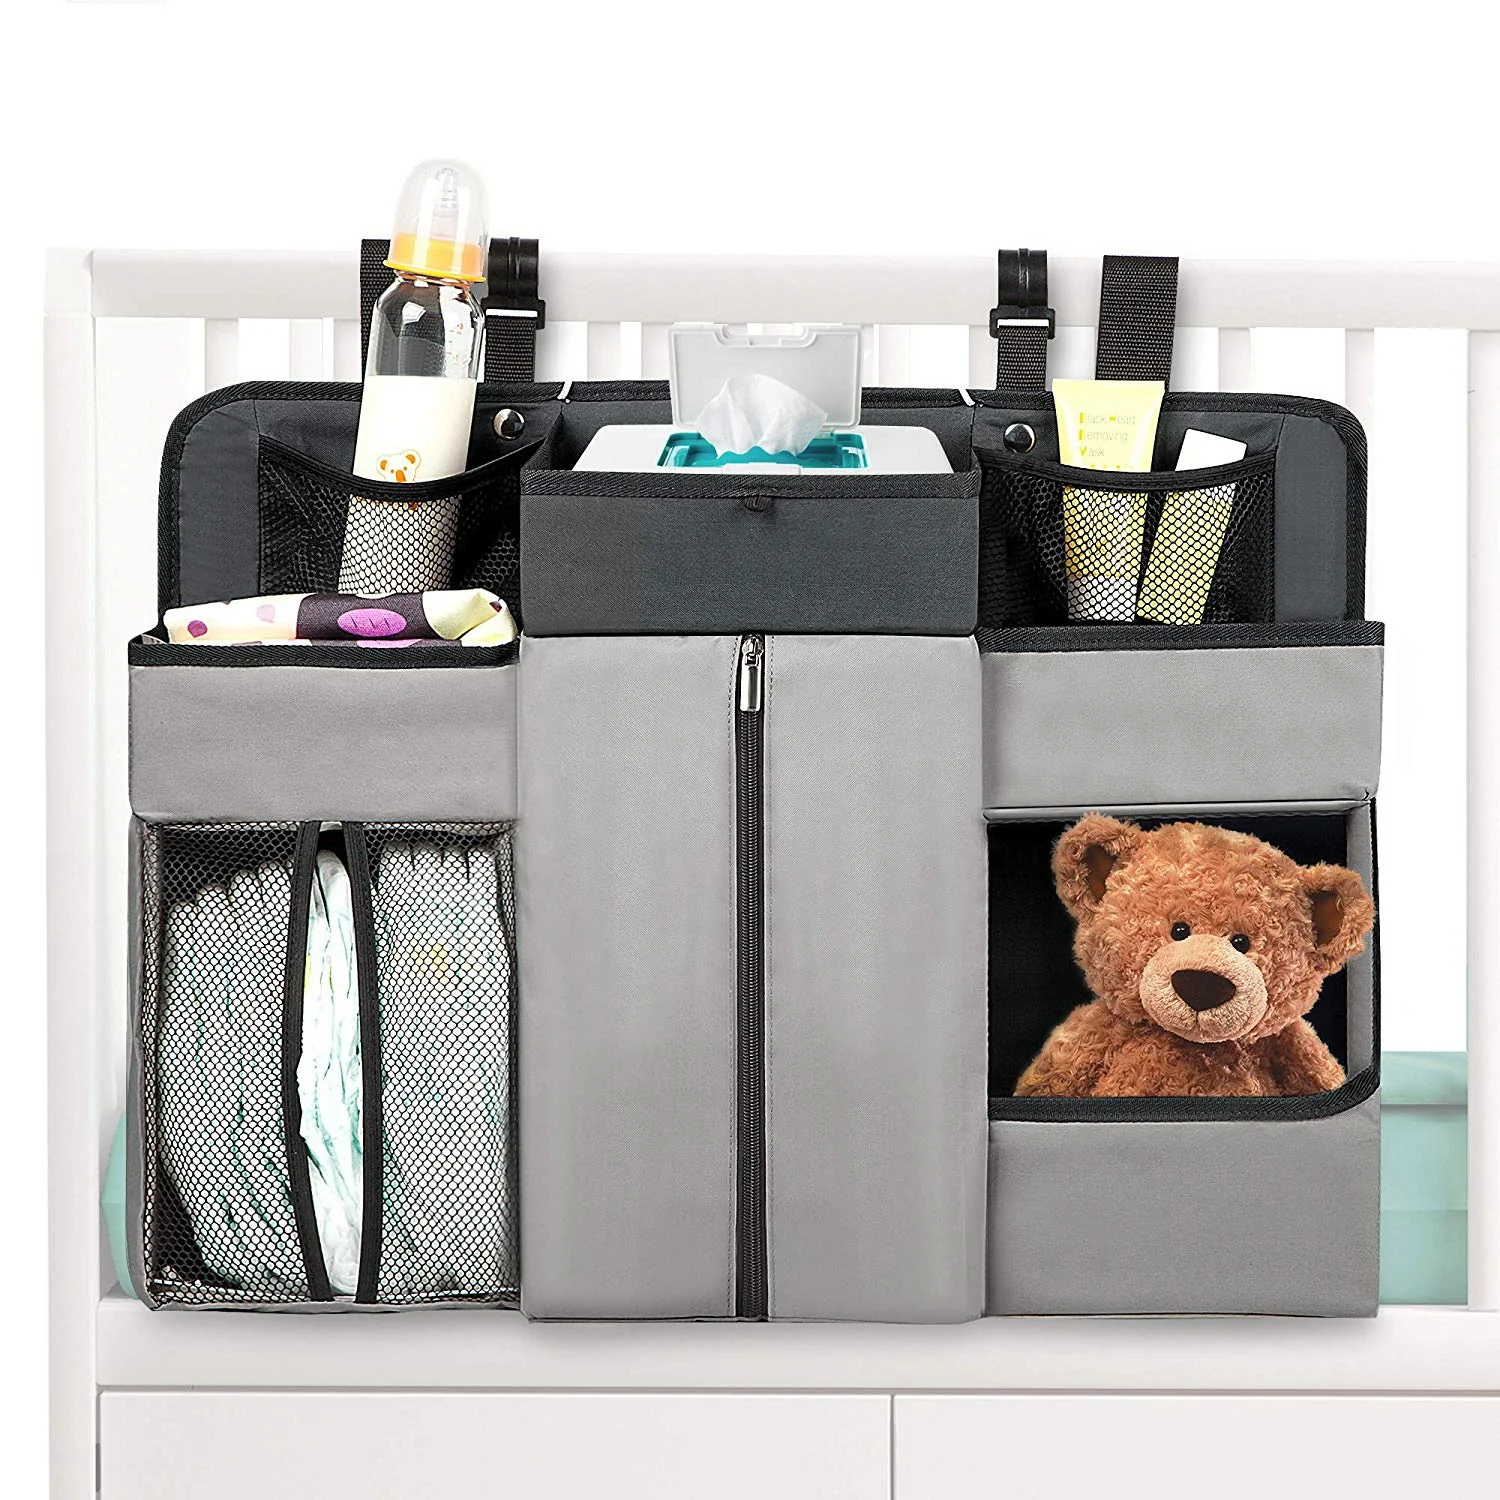 Fashion Baby Nursery Room Diaper Organizer Hanging Caddy Accessory  Organizer For Baby Crib Playard Changing Table Diaper Stacker - Buy Baby  Nursery Room Diaper Organizer,Hanging Caddy Accessory Organizer For  Baby,Changing Table Diaper